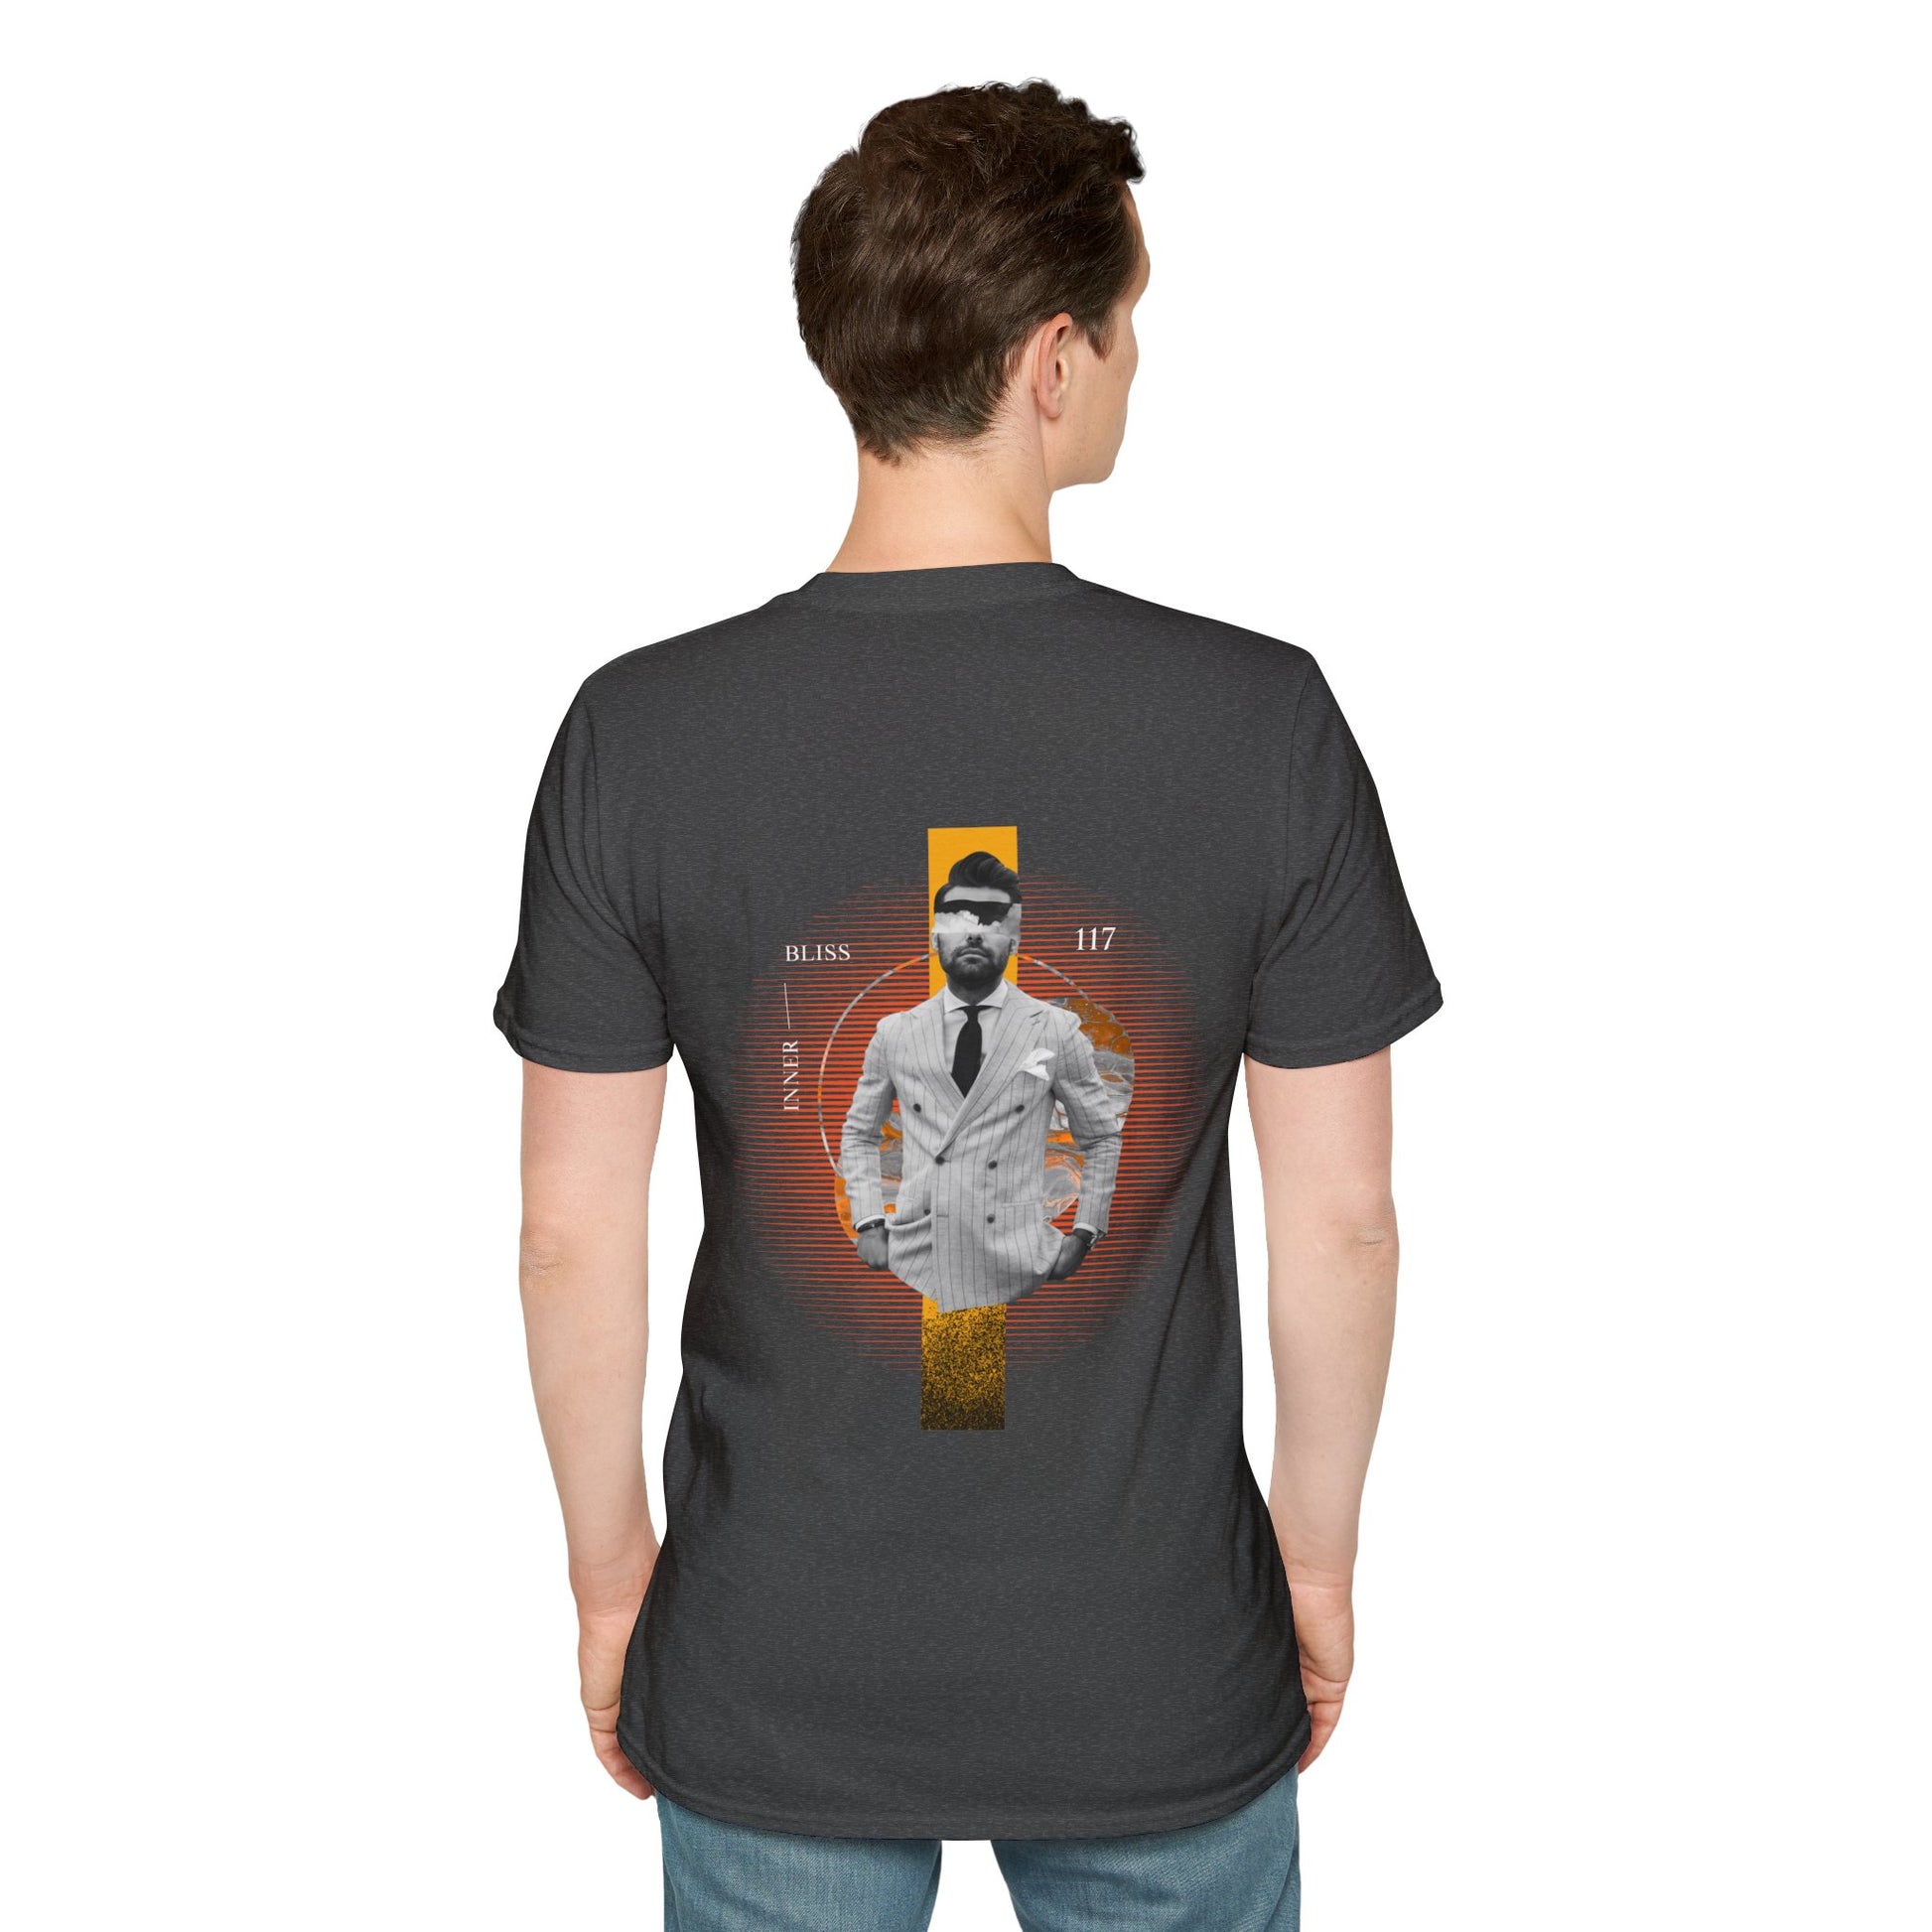 Dark Grey T-shirt featuring a faceless man in a suit with a bold yellow rectangle